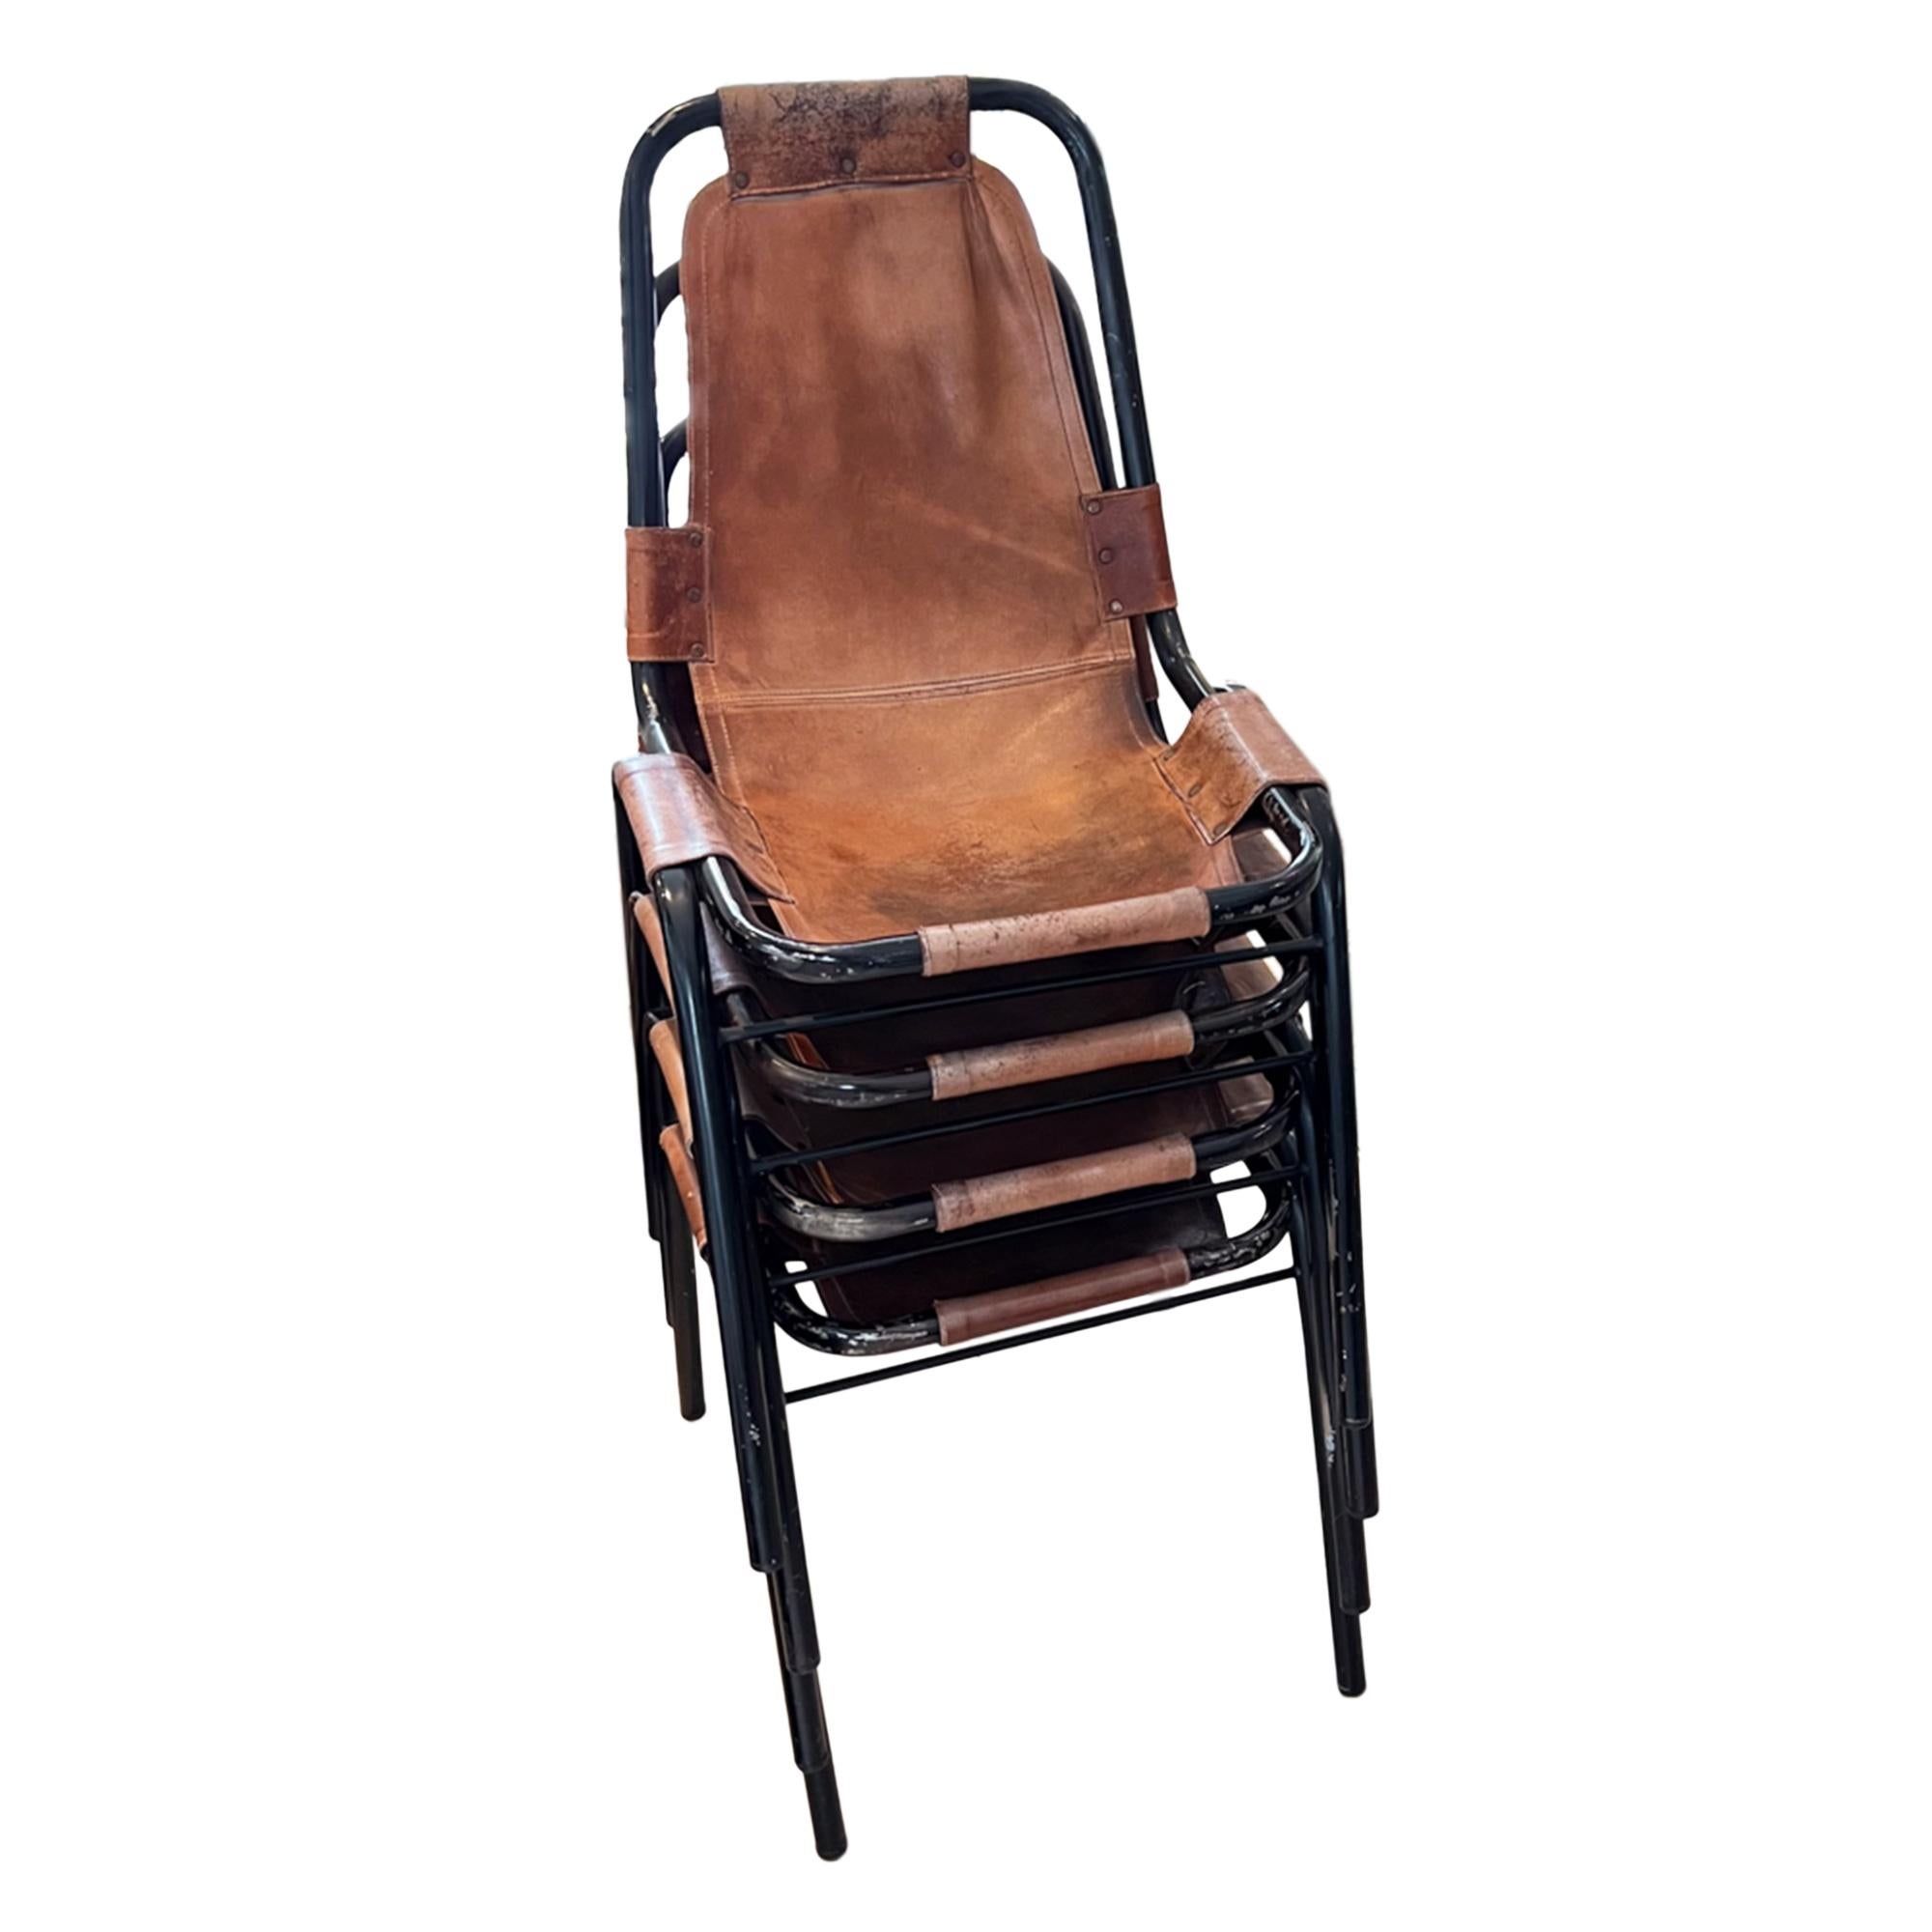 This is a great set of stacking chairs - the style was selected by the French architect and designer Charlotte Perriand in the 1960s for the Alpine ski resort of Les Arcs. 
They are in the style of DalVera.

Made from tubular steel and leather, the